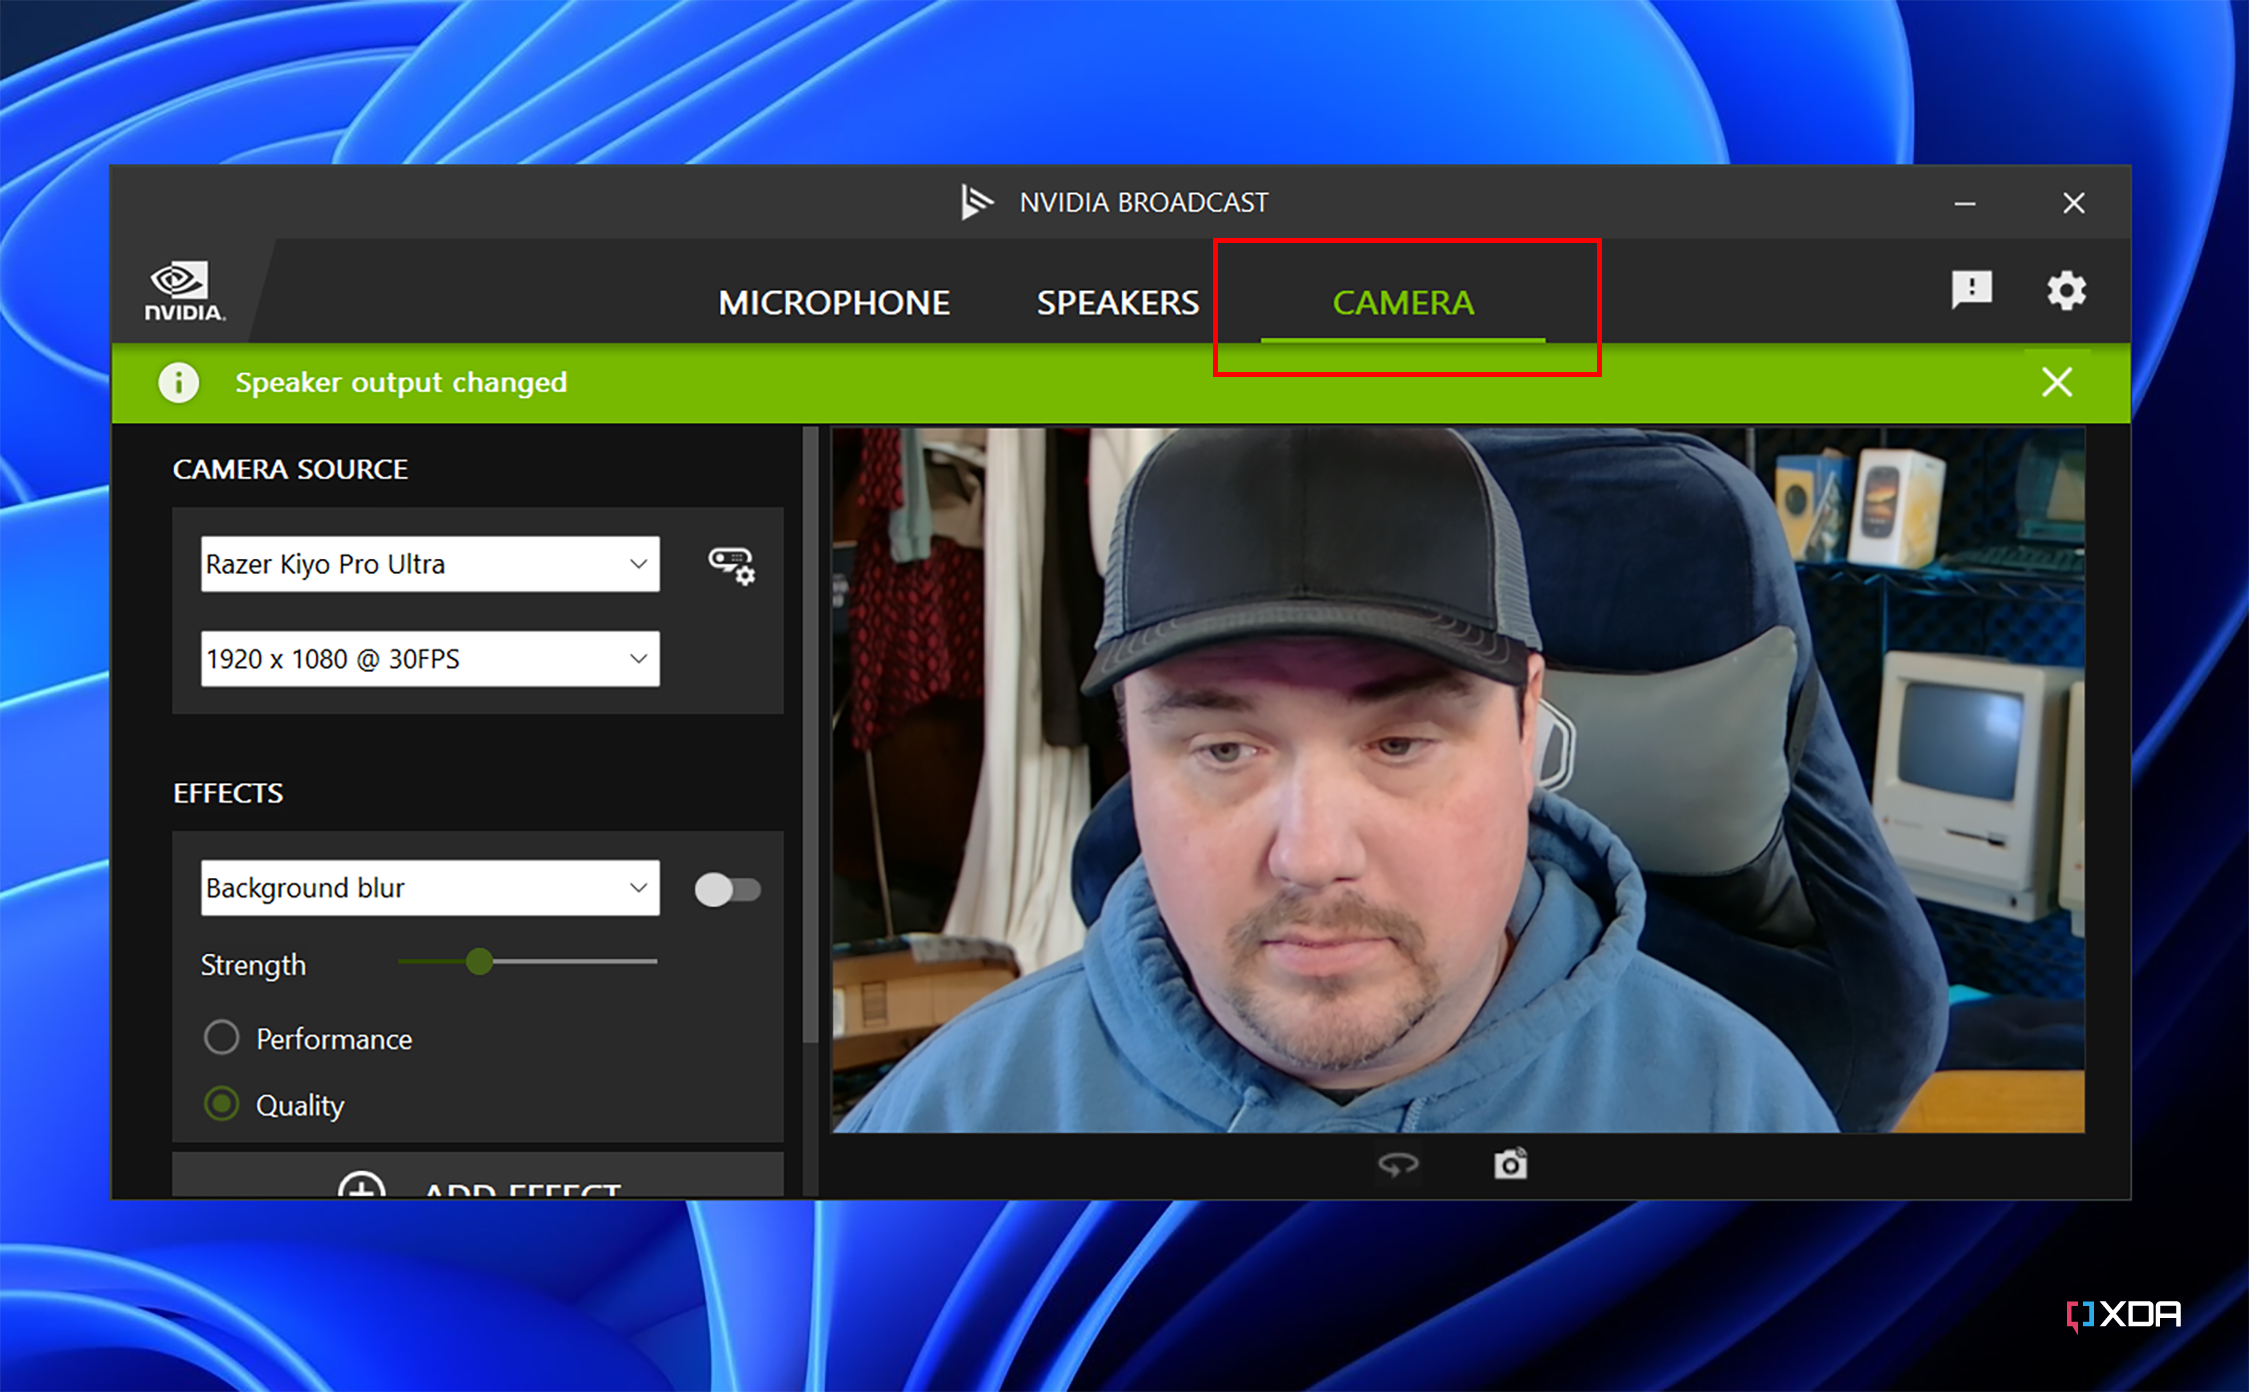 After Nvidia Broadcast launches, select the Camera tab.